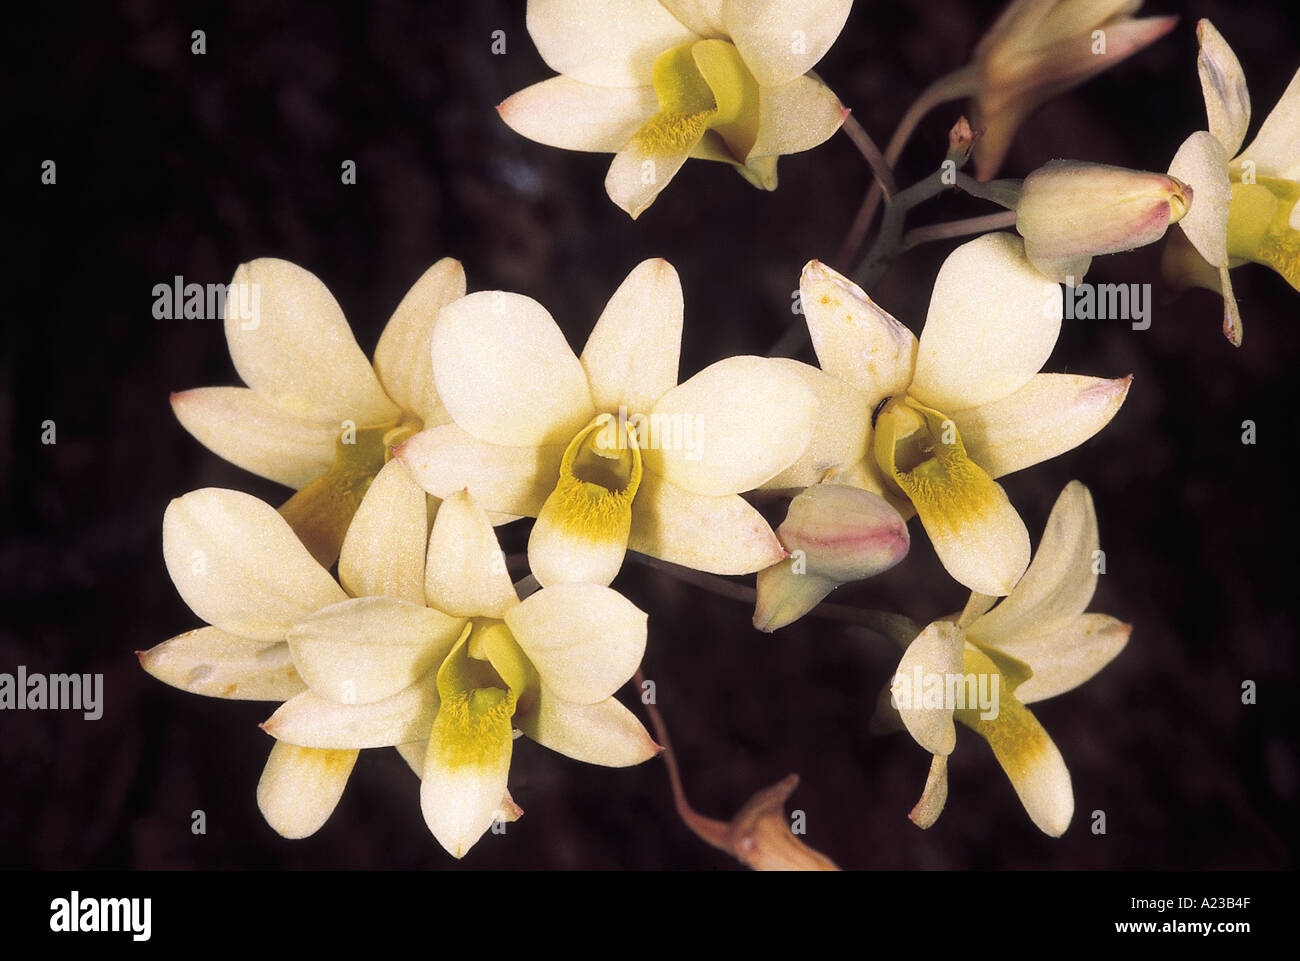 Dendrobium Ovatum. Family: Orchidaceae. An epiphytic orchid with pseudobulbs that flowers in the dry season. Stock Photo